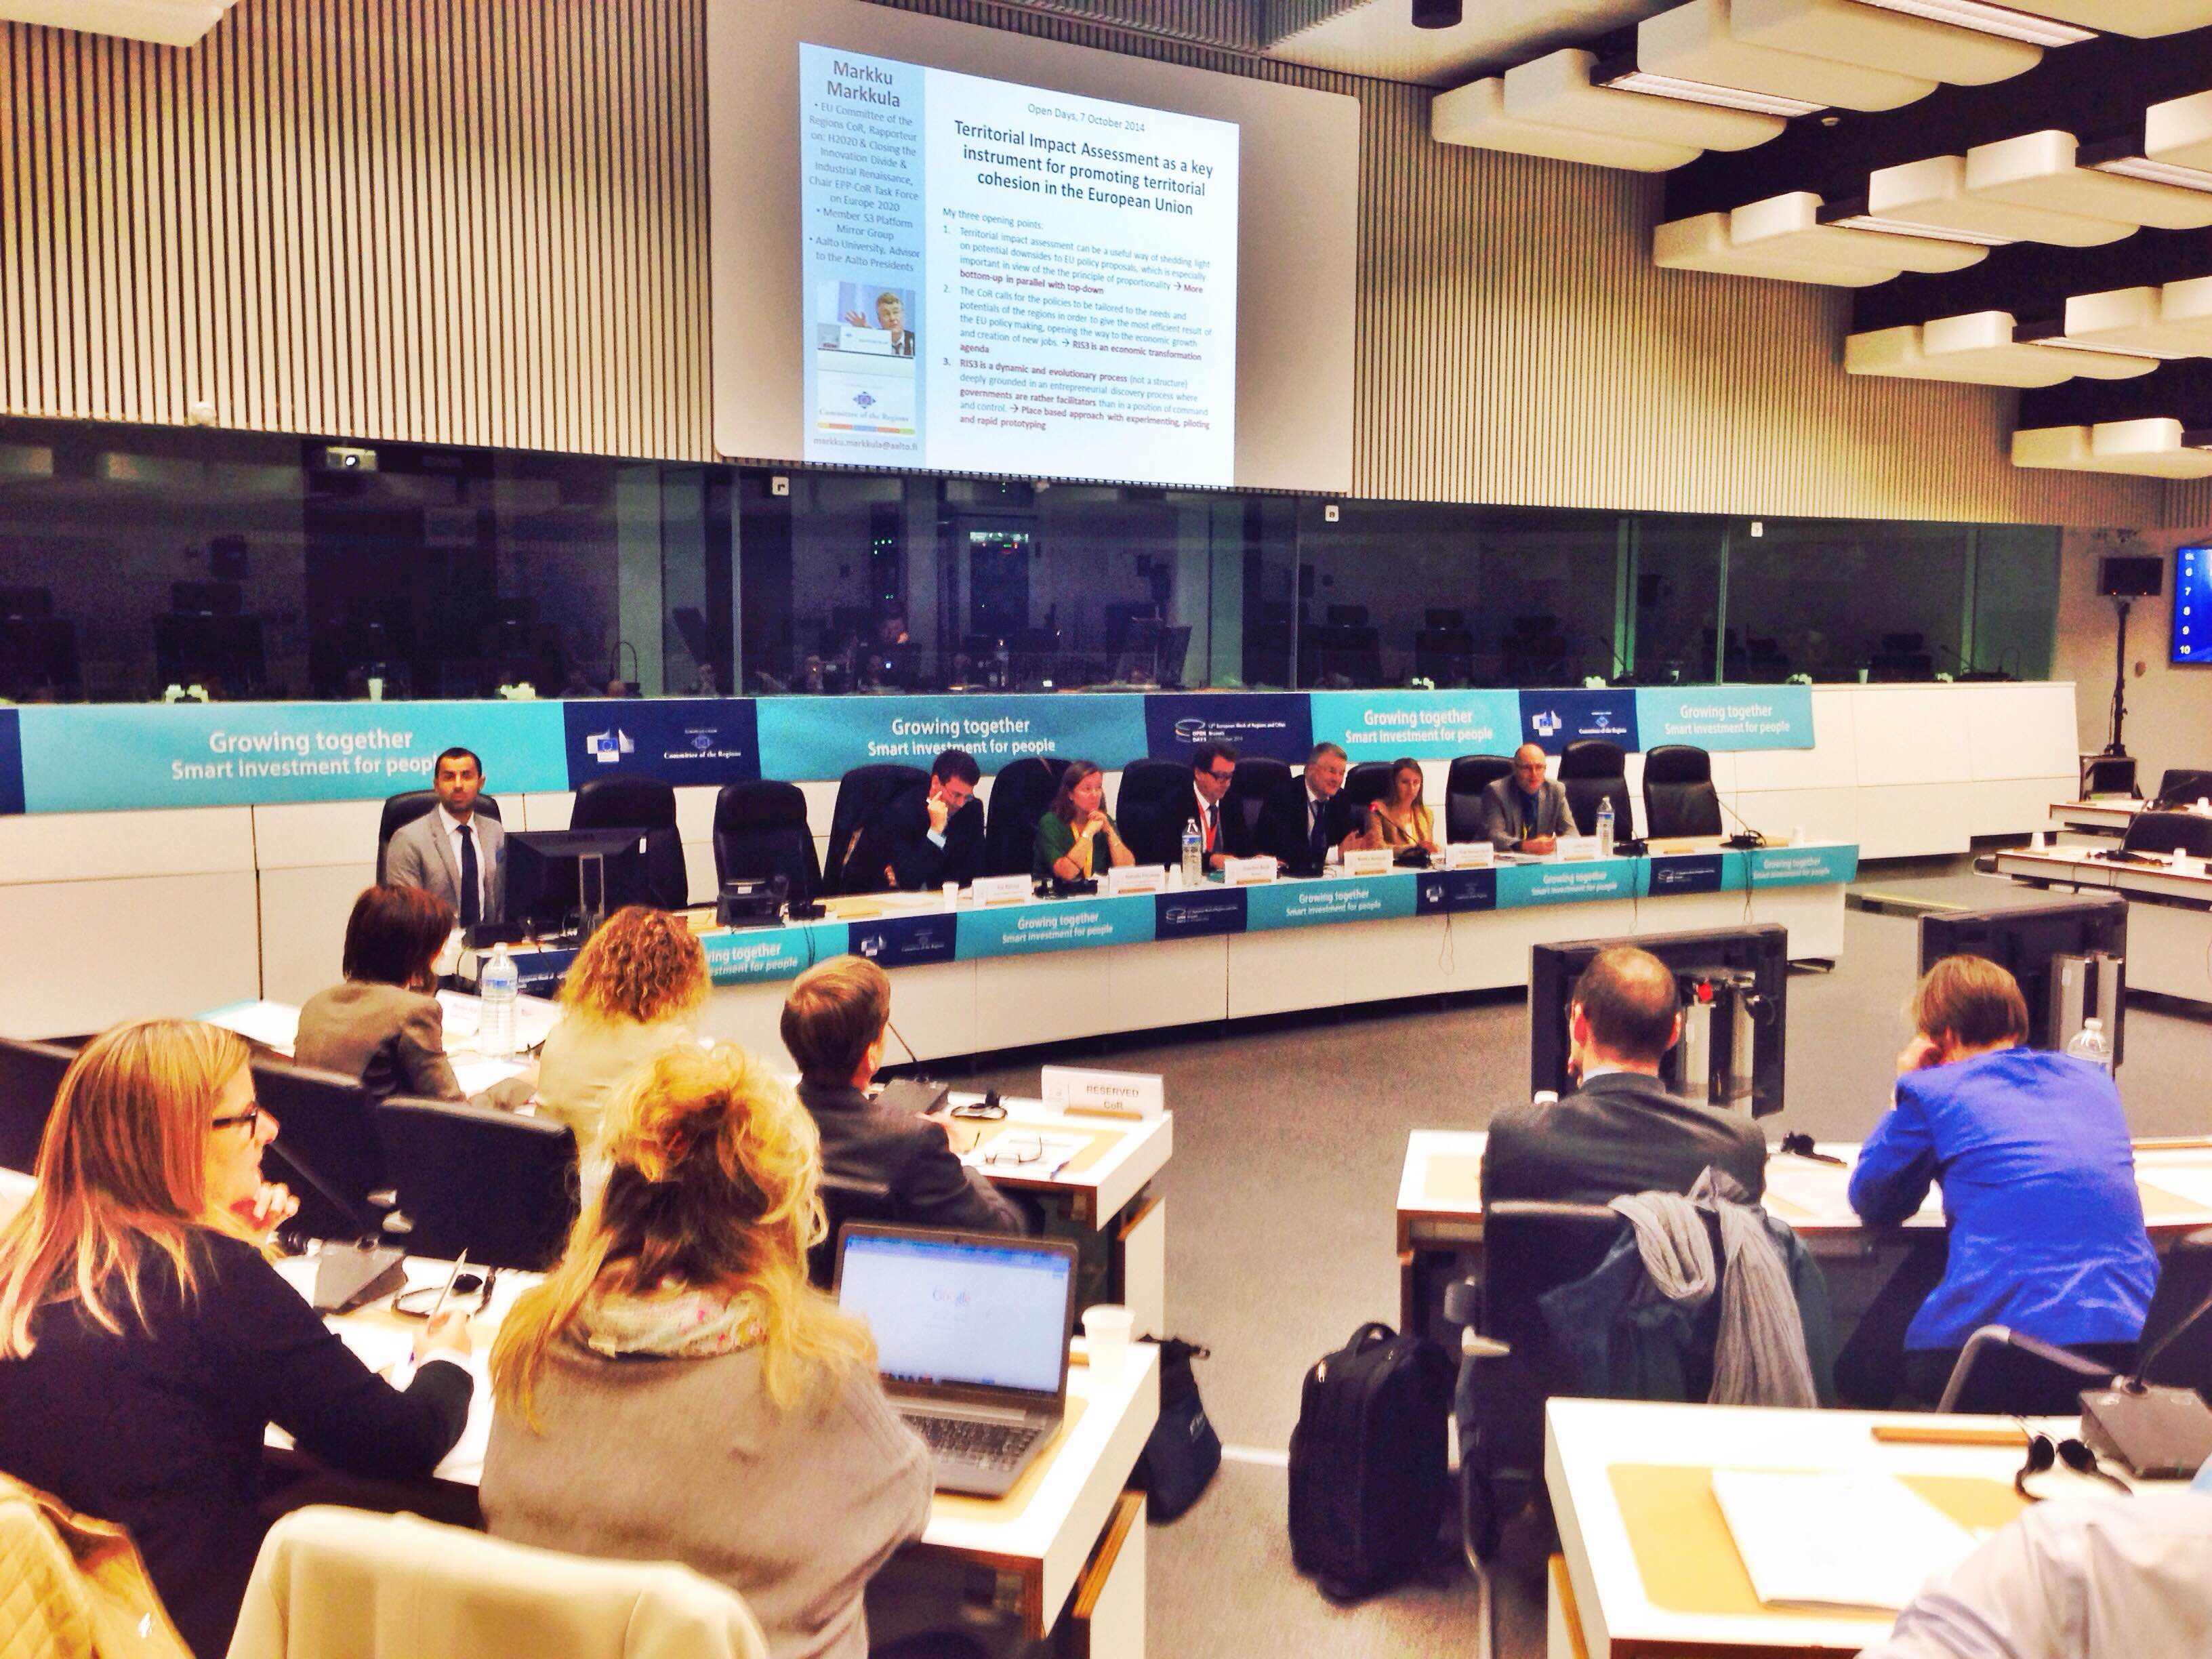 OPEN DAYS 2014: Territorial Impact Assessment as a Key Instrument for Promoting Territorial Cohesion in the European Union